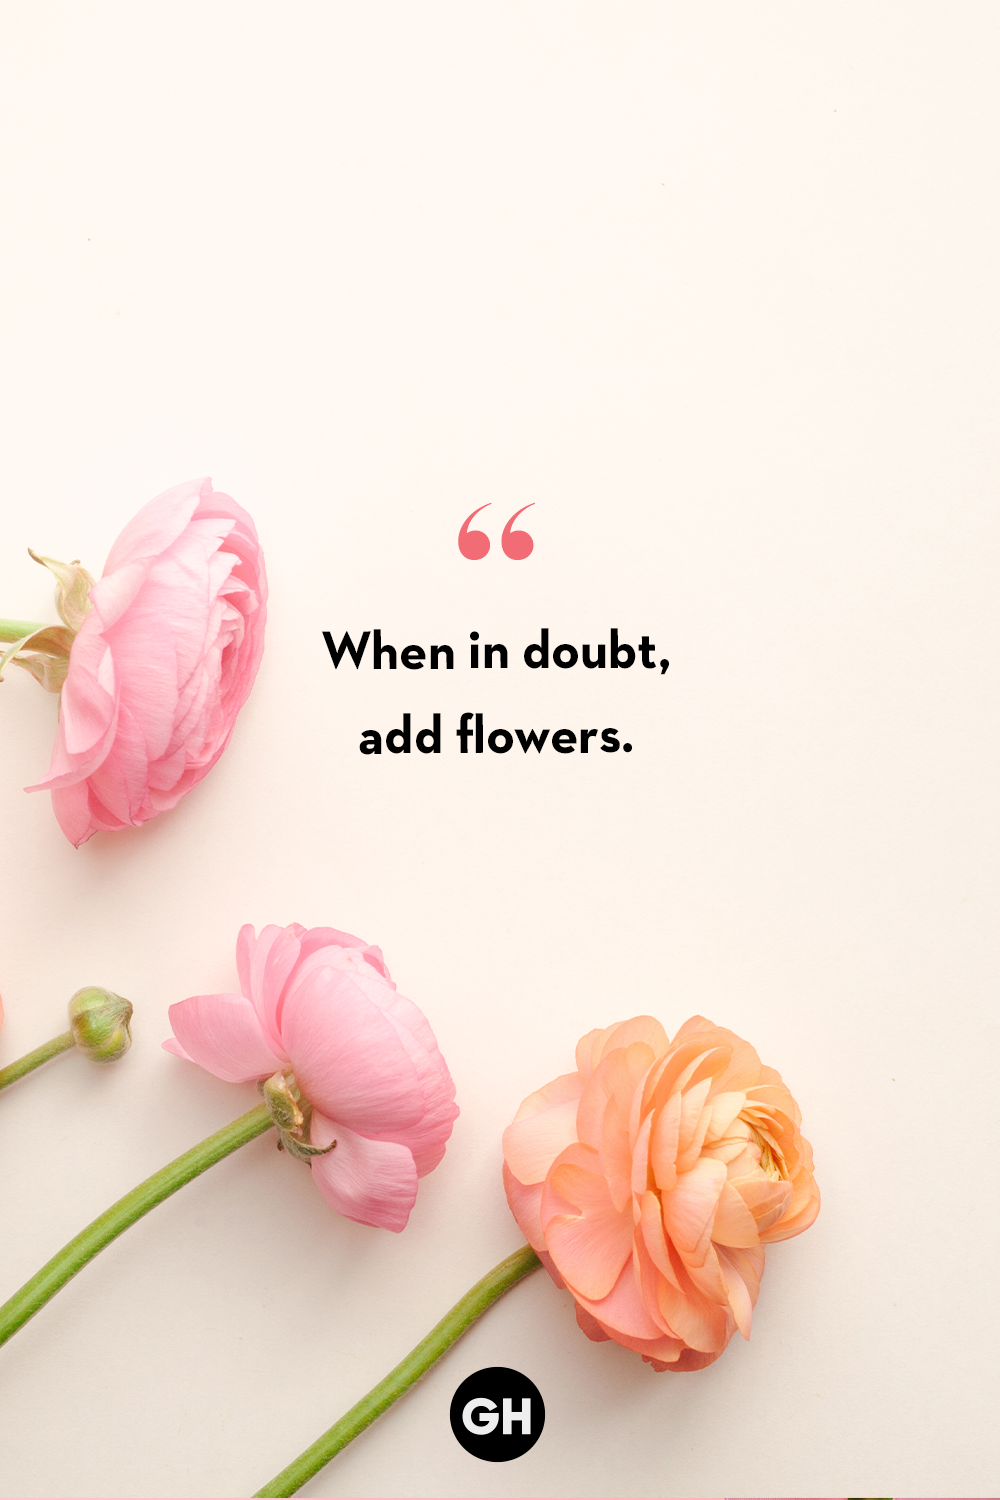 quotes about flowers and friends